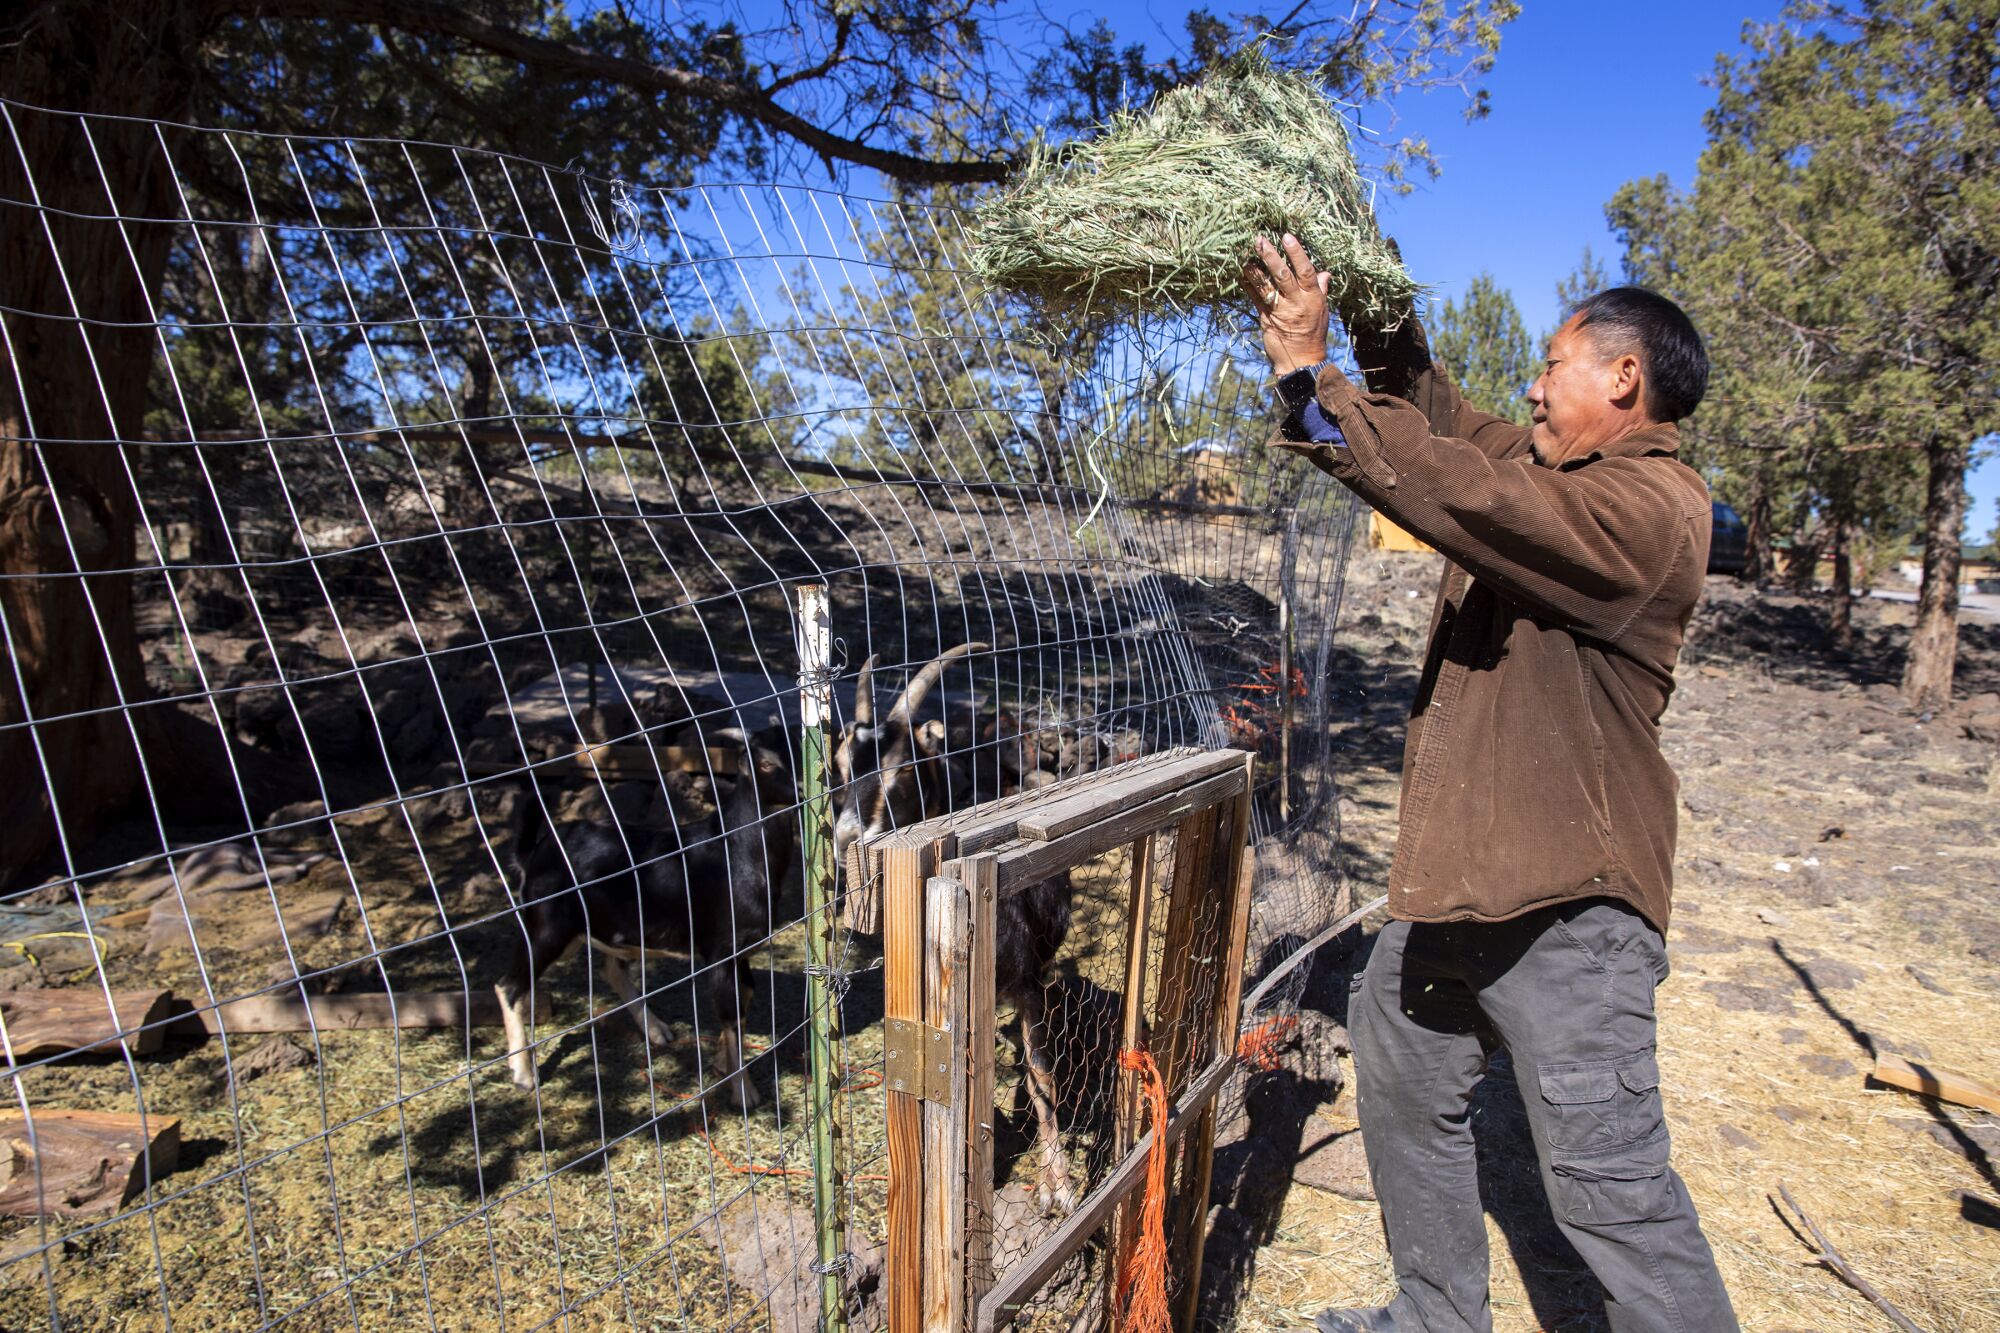 Bee Xiong feeds his goats on his ranch in the Mount Shasta Vista subdivision. He says he no longer farms marijuana.